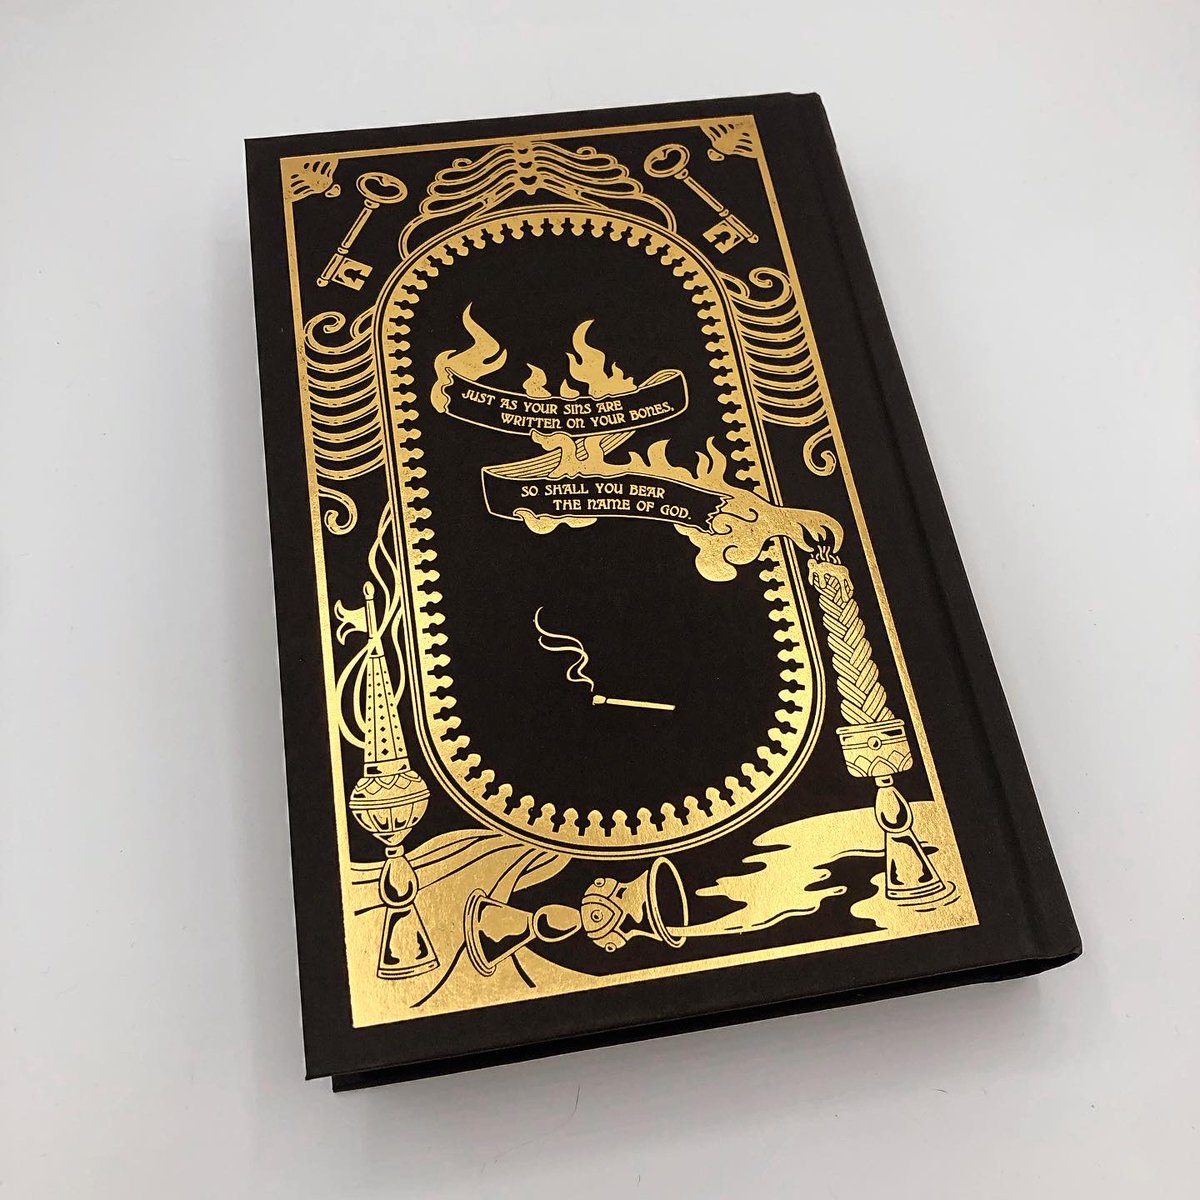 excited to finally share my gold foil hardcover designs for the @owlcrate edition of @LauraRSamotin's dark Jewish fantasy novel, The Sins on Their Bones! so thrilled with how this printed.